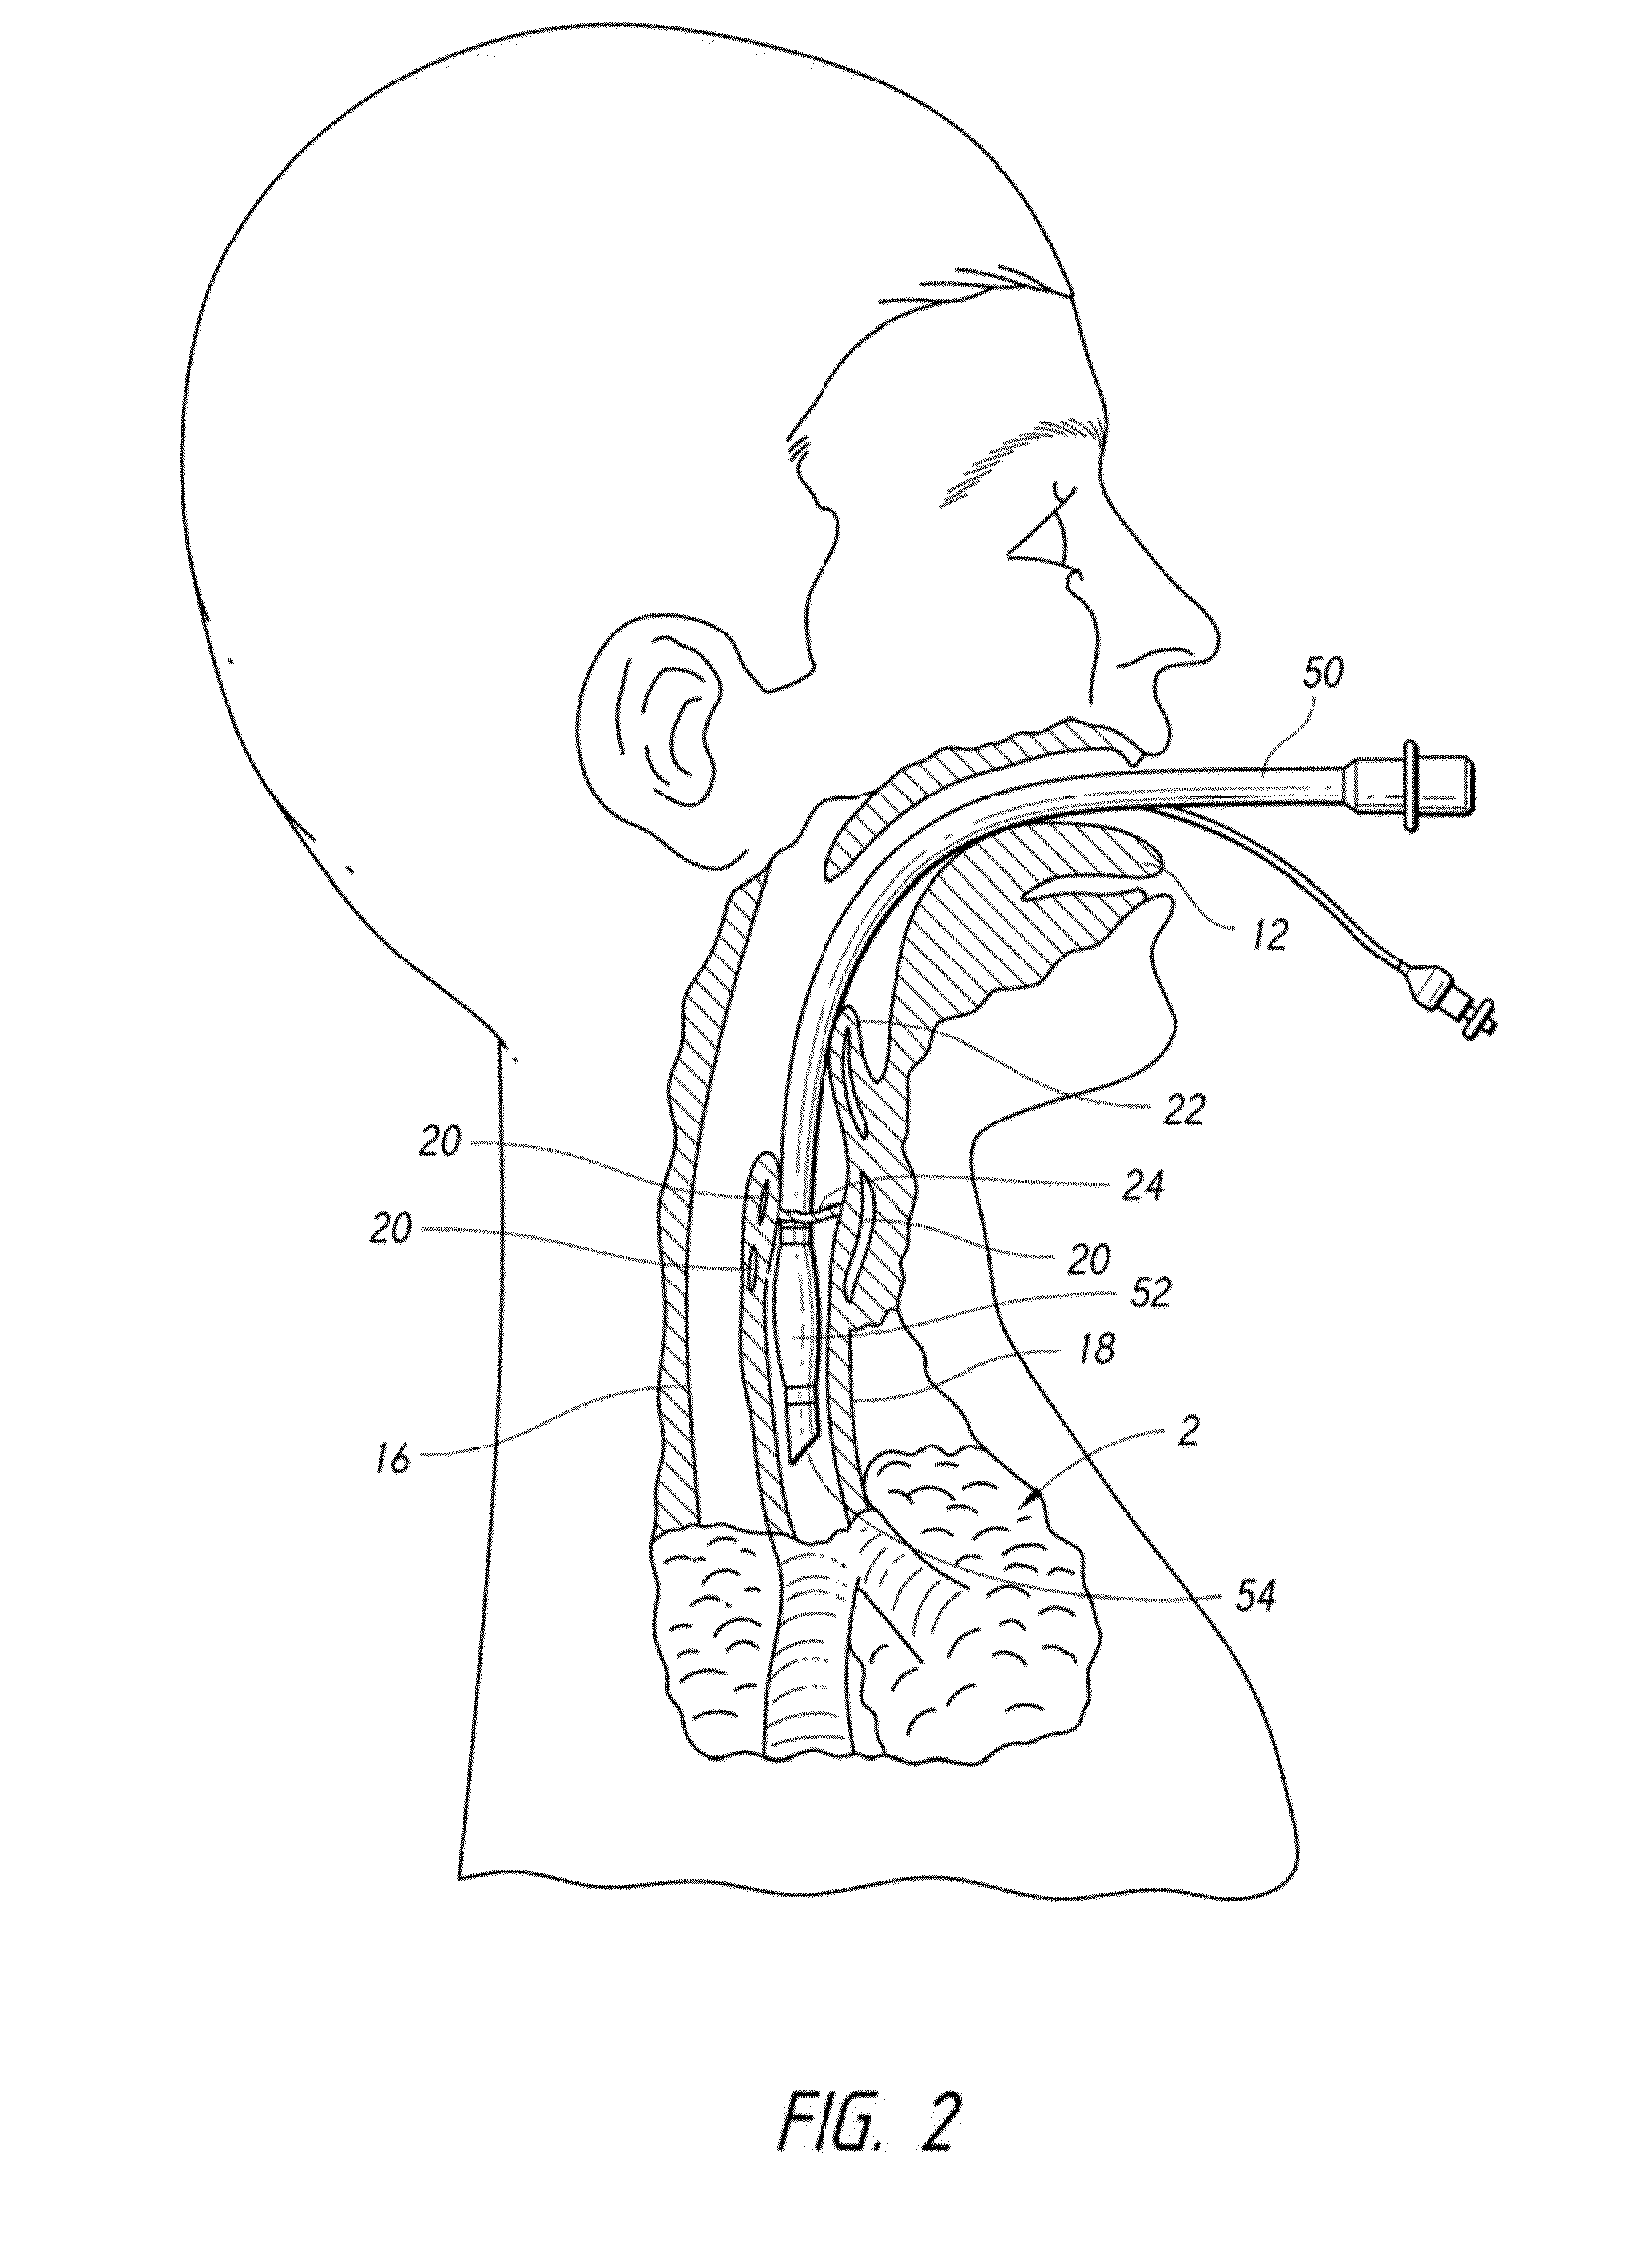 Apparatus and method for improved assisted ventilation